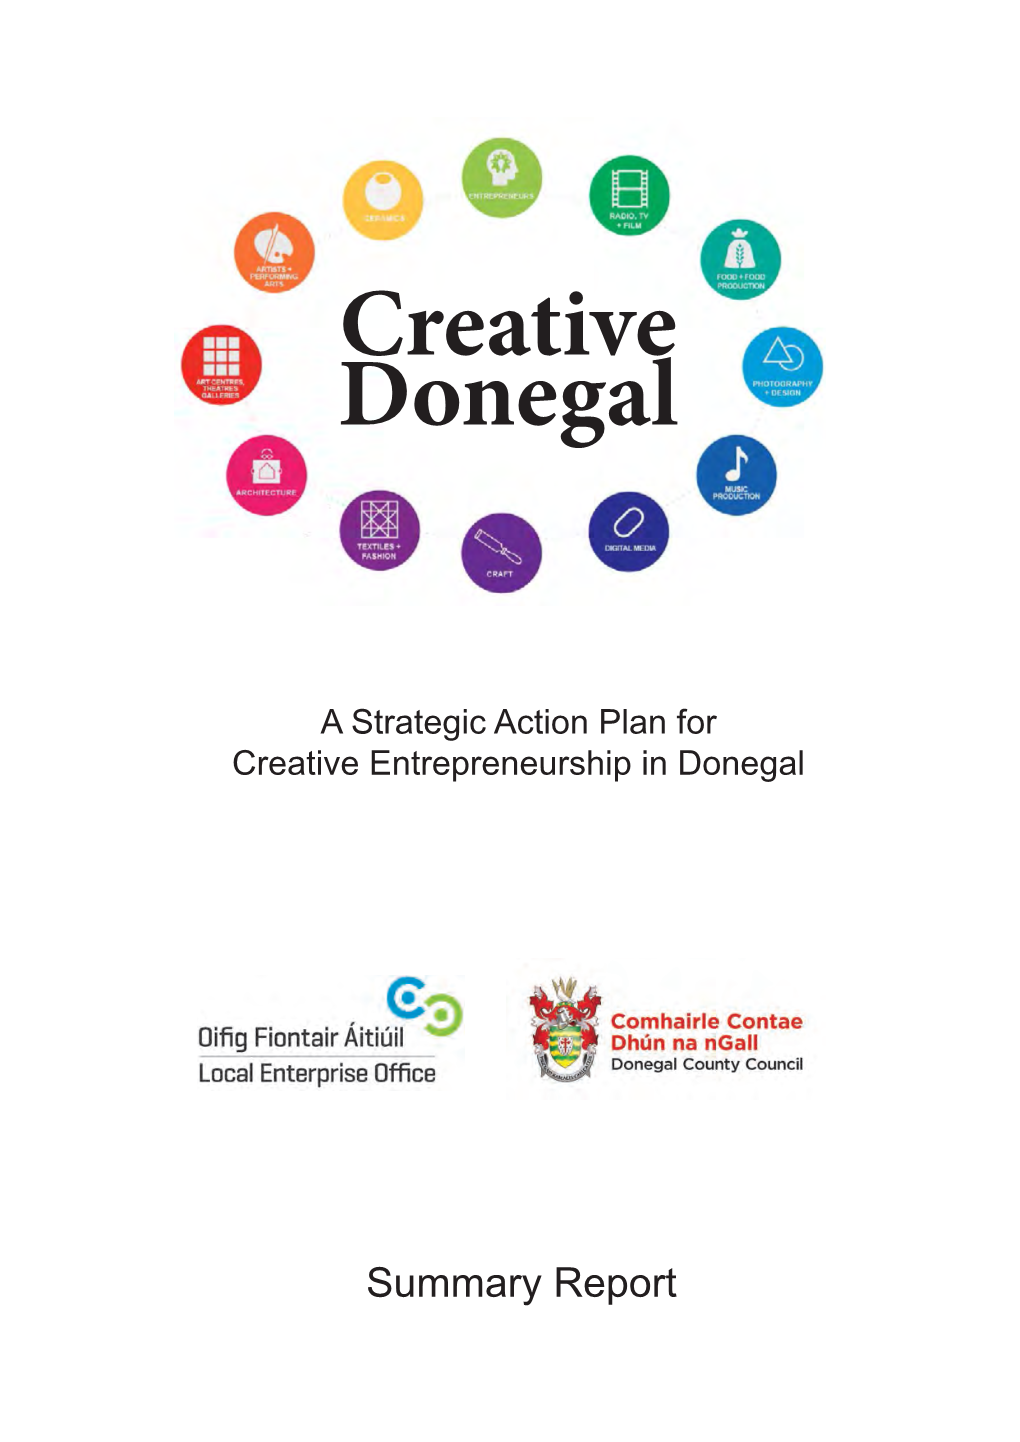 Creative Donegal Summary Report